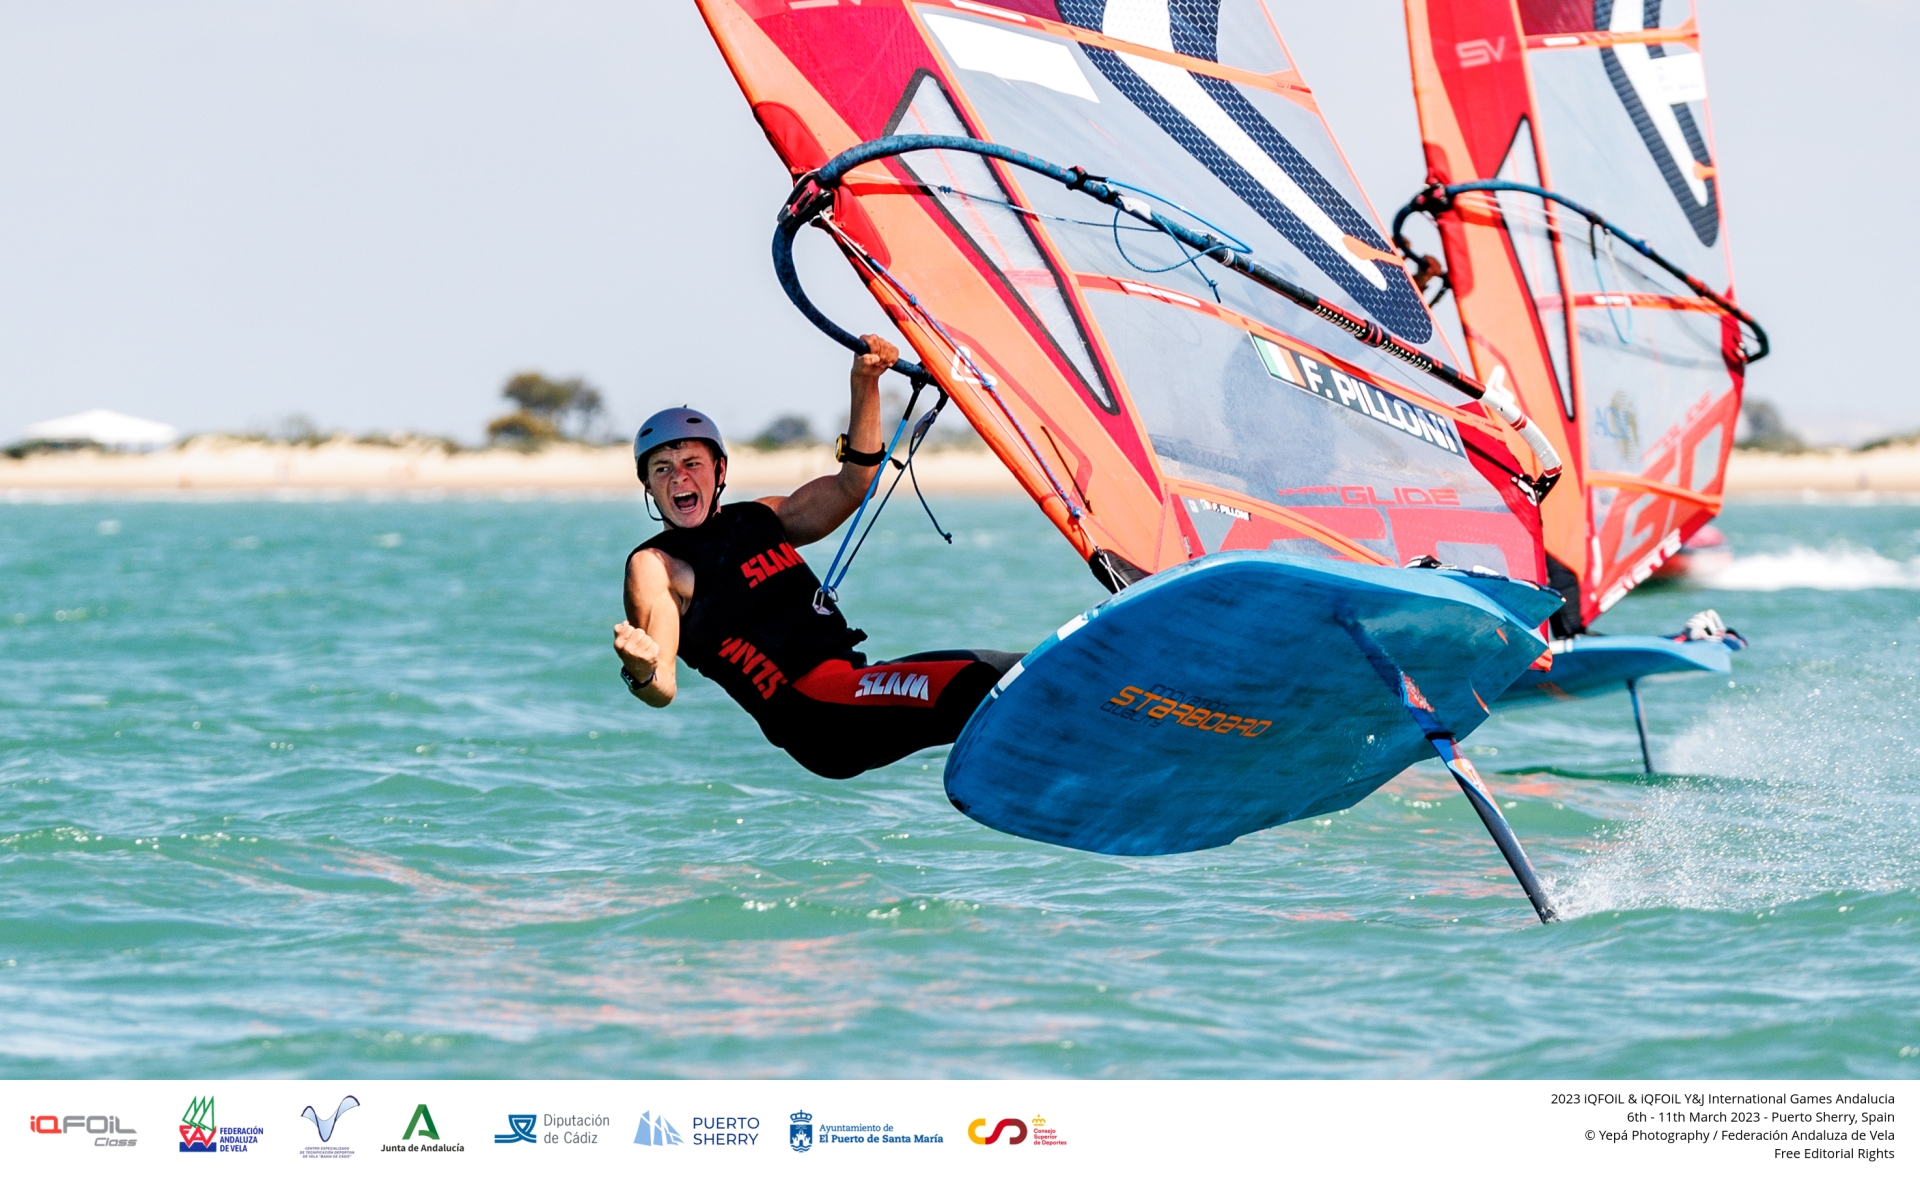 Outstanding result for Federico Pilloni at IQFoil Games in Cadiz - News - Yacht Club Costa Smeralda